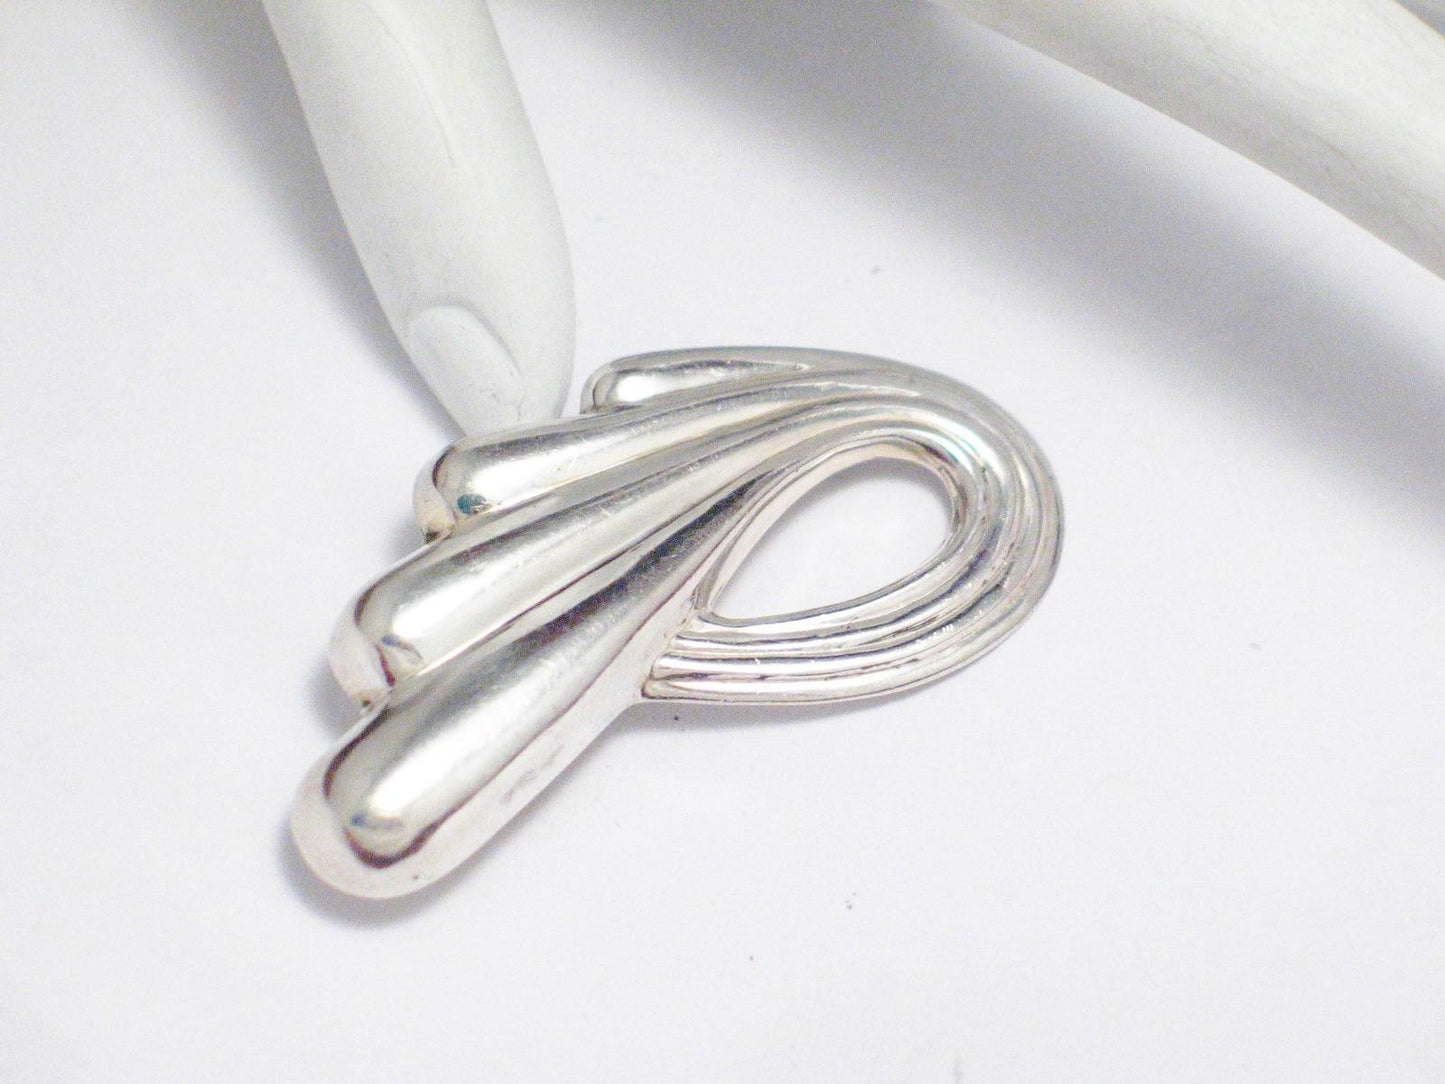 Sterling Silver brooch swoosh Wave design pin ribbed - Blingschlingers Jewelry